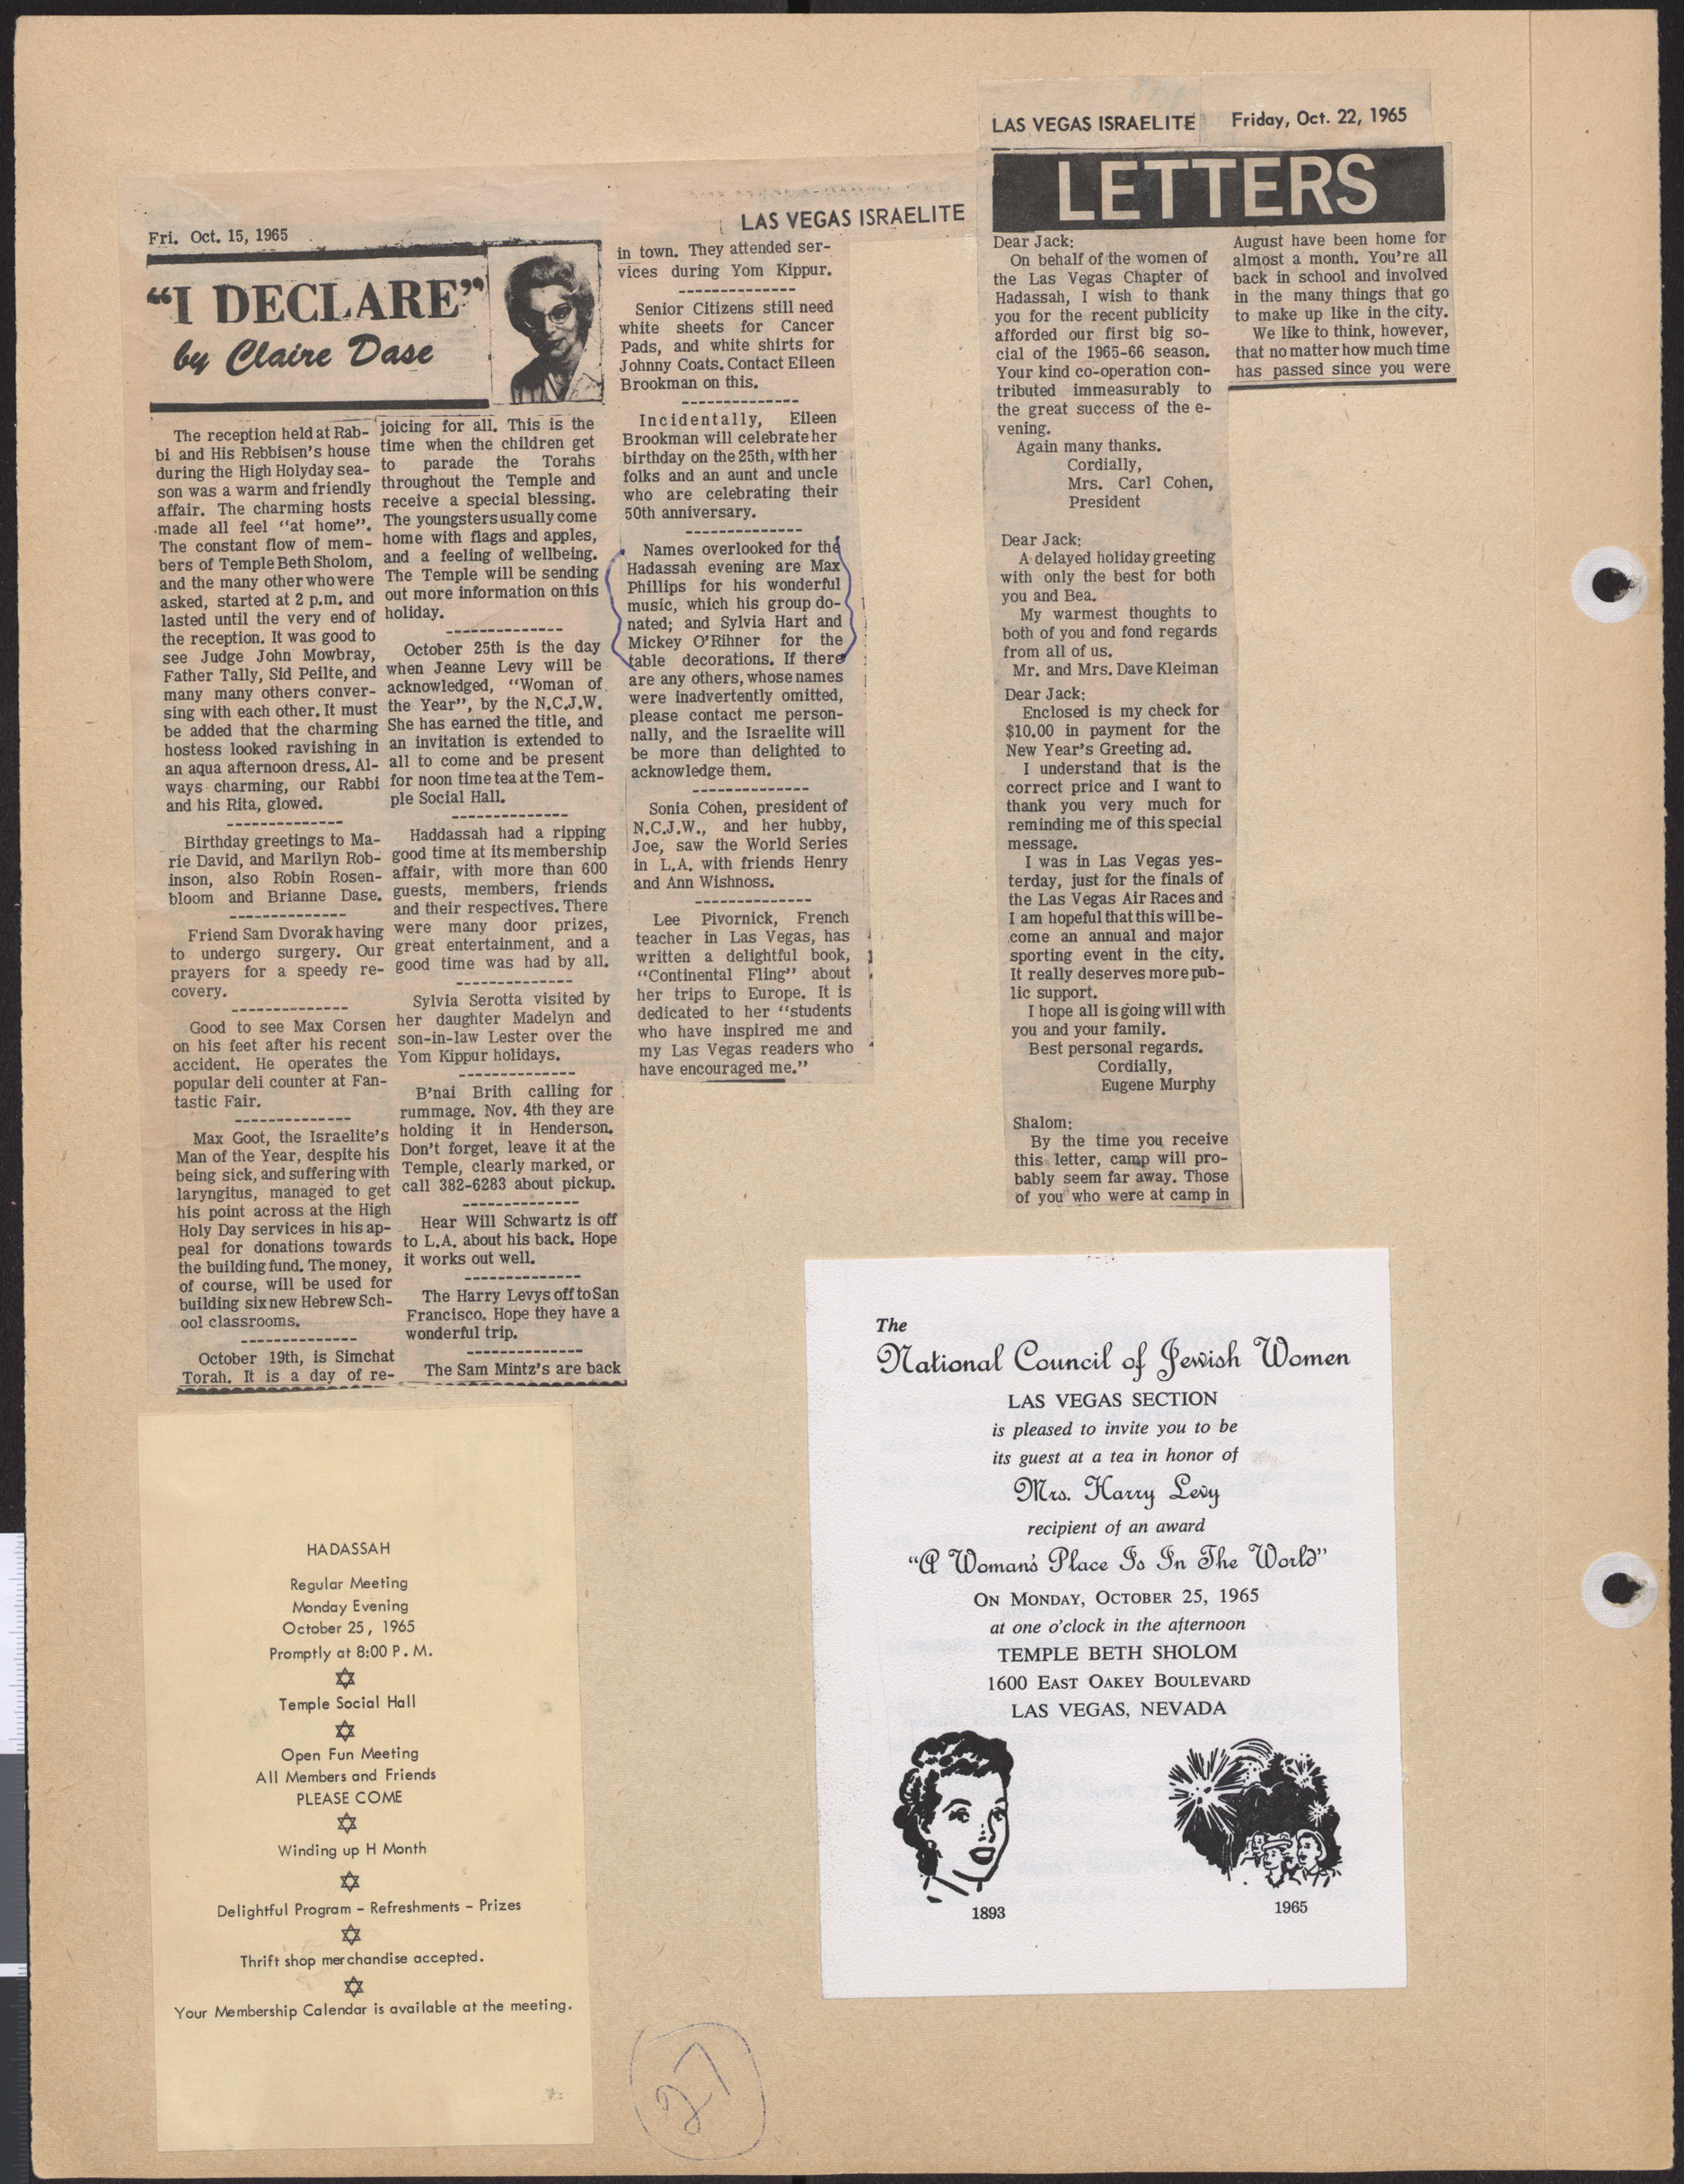 Newspaper clippings about Hadassah meetings and letter to the editor, October 1965, and event invitations